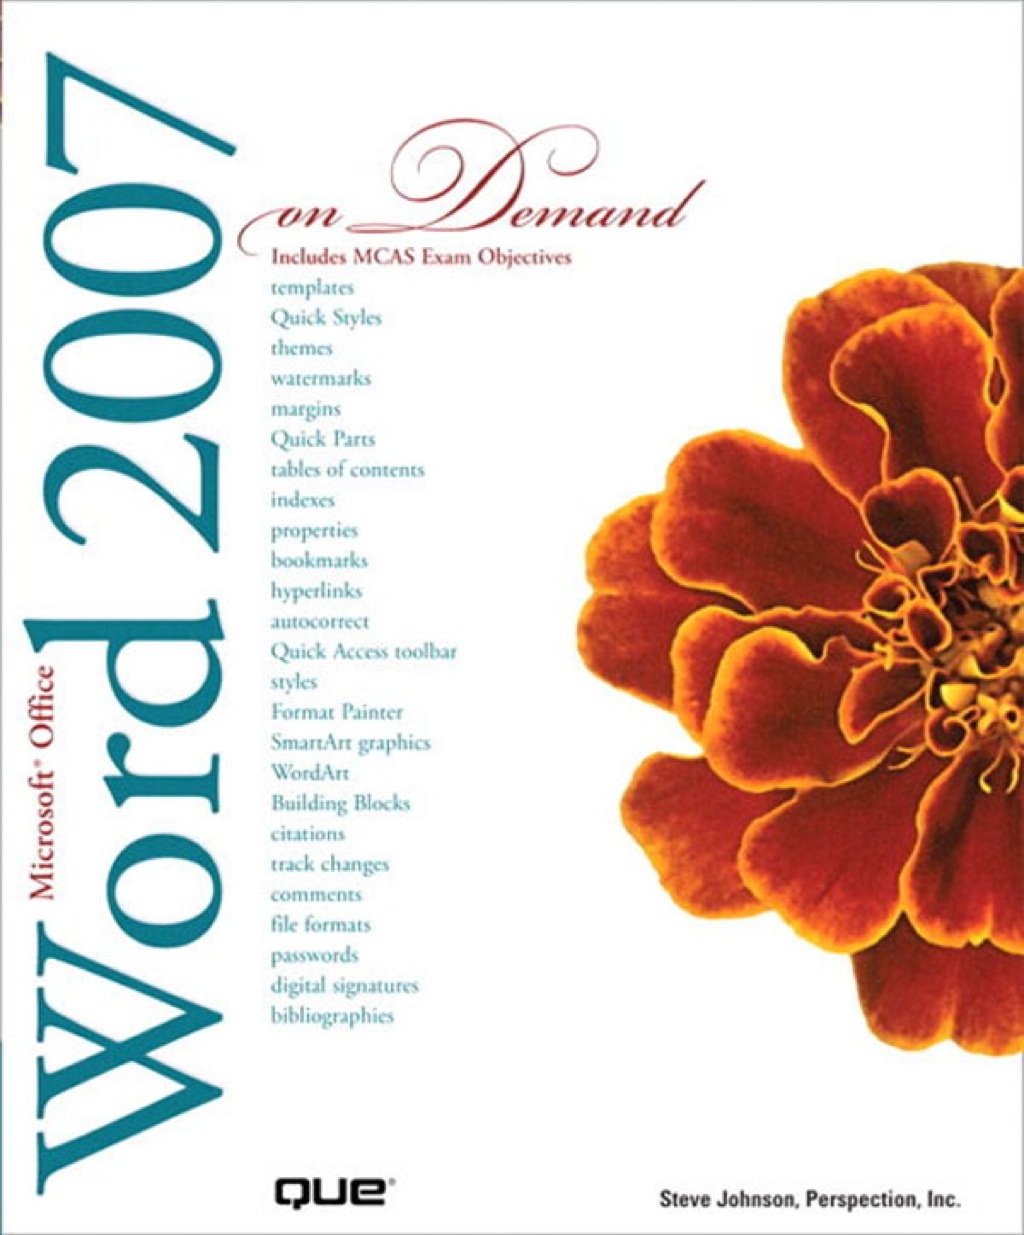 Microsoft Office Word 2007 On Demand (eBook) - Perspection Inc.